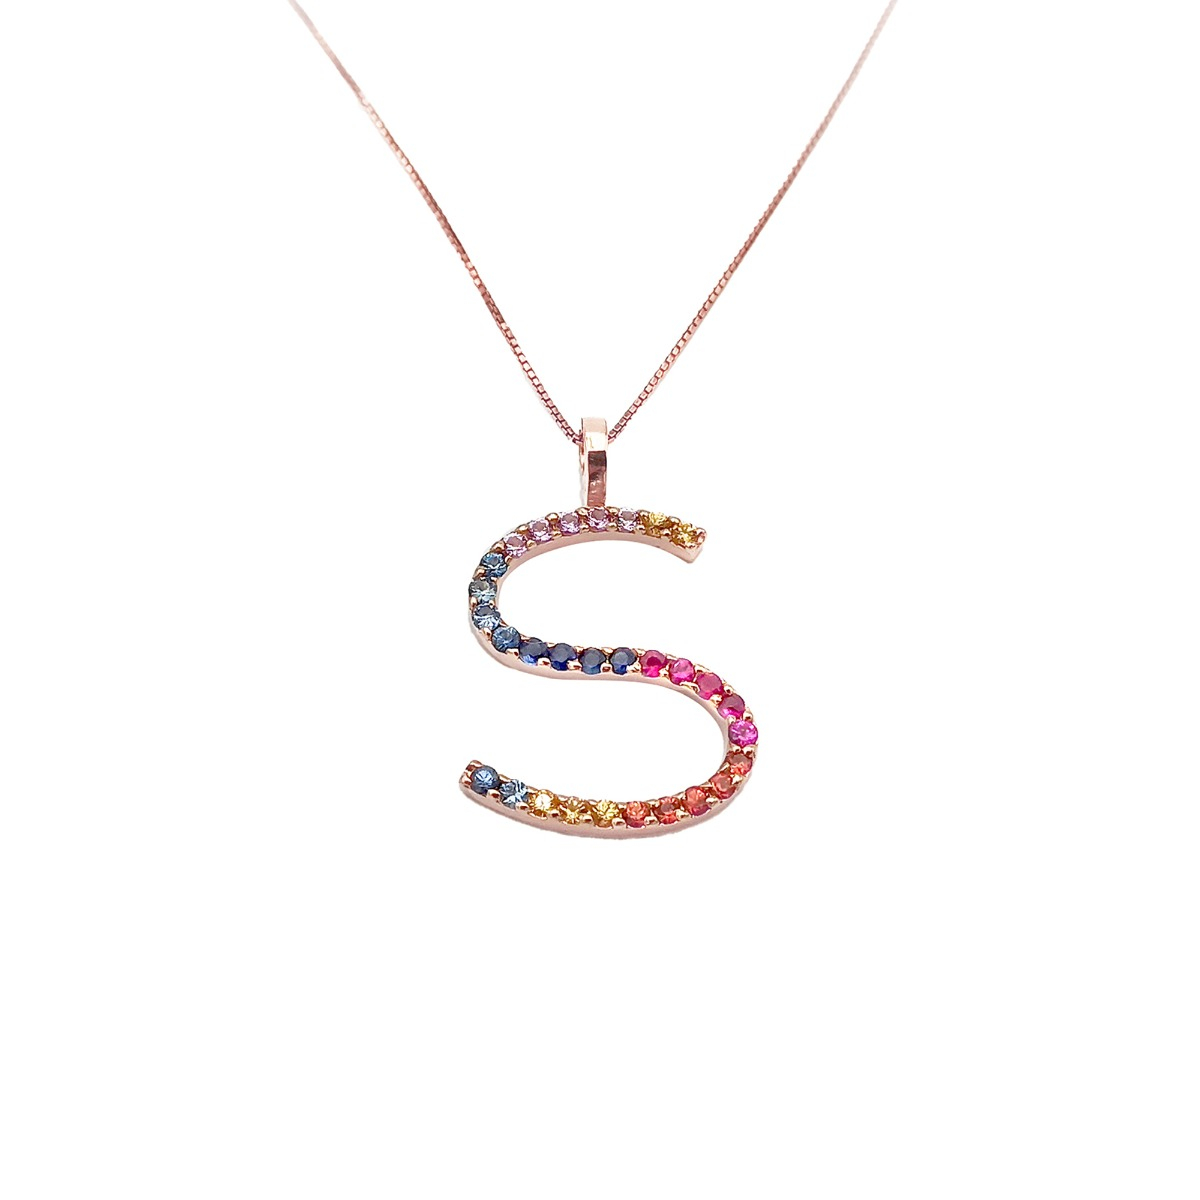  Rainbow Necklace with colorful sapphires